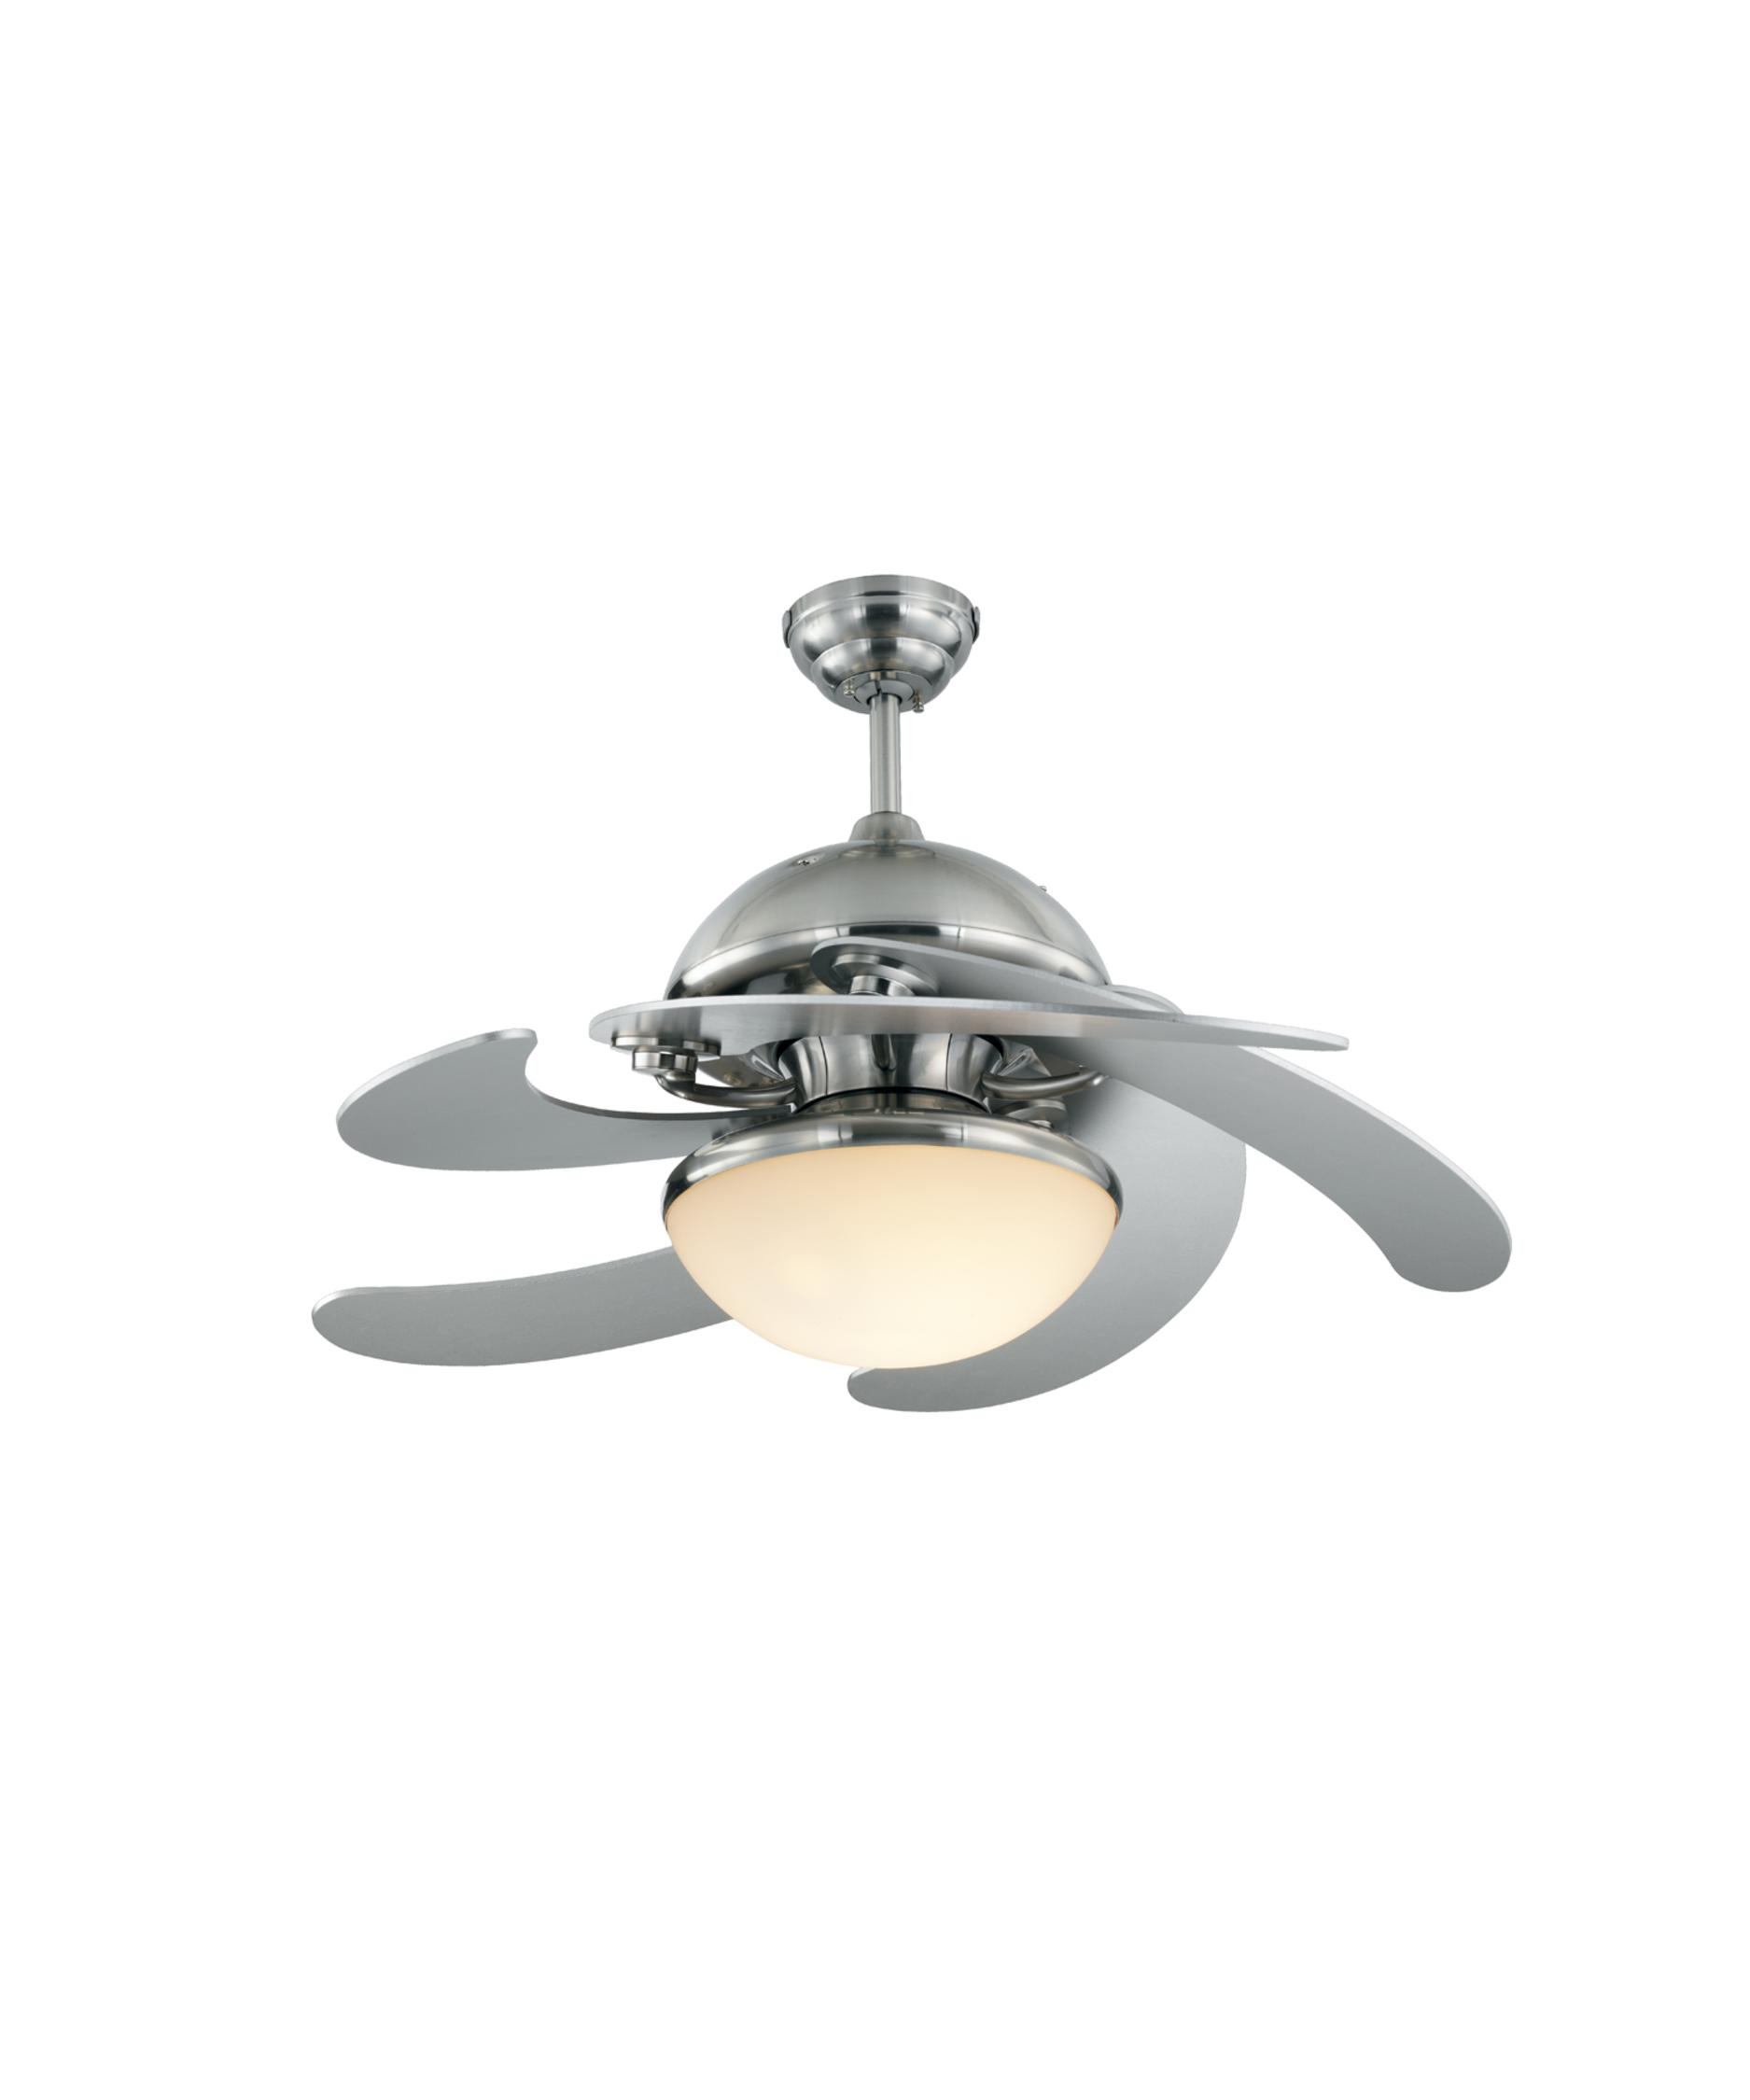 Luxury Murray Ceiling Fans Home Depot Insured By Ross